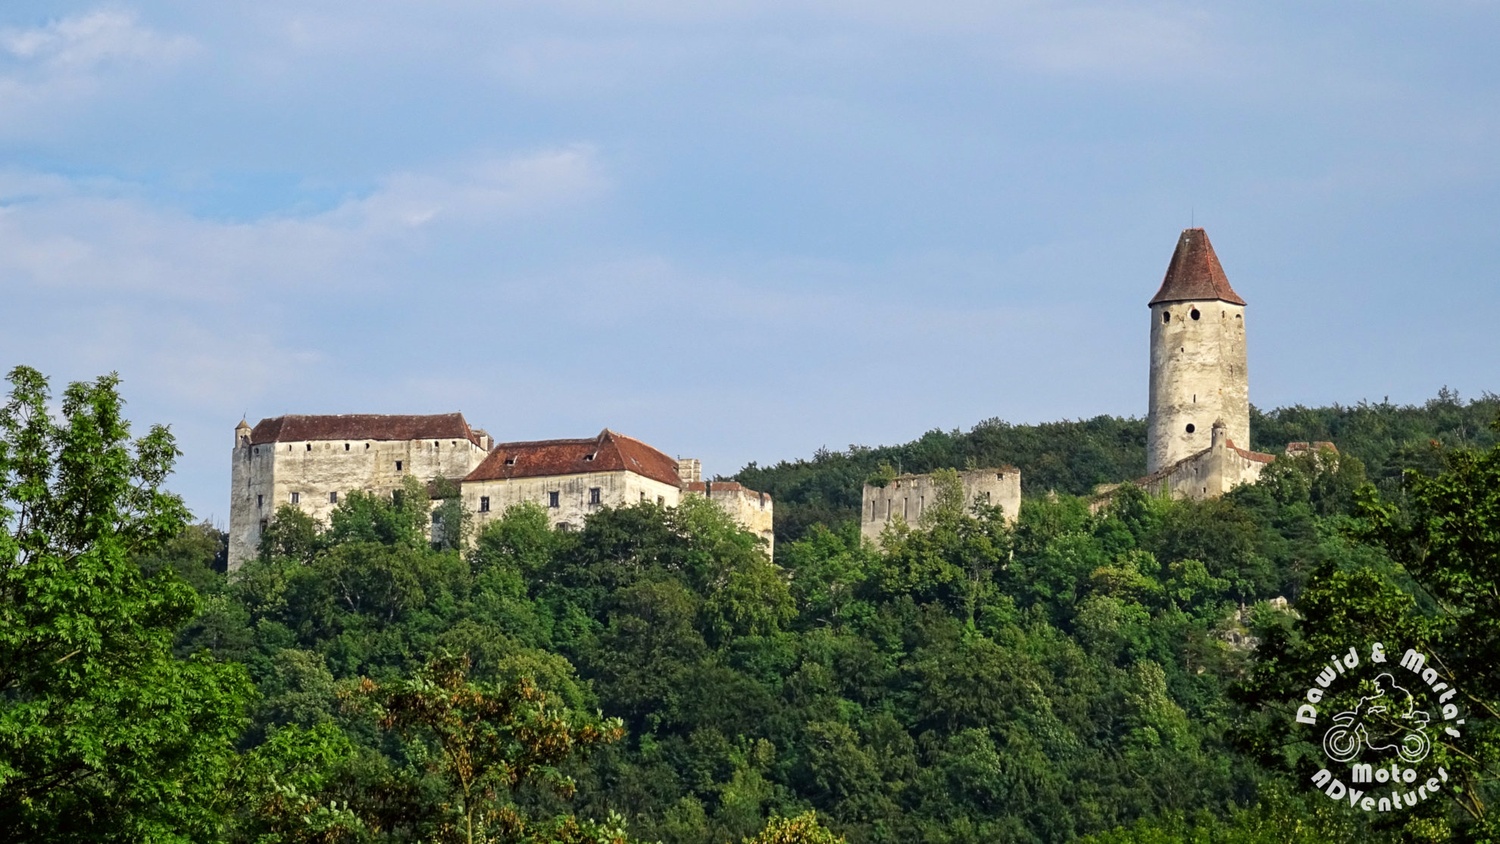 Close up at Burg Seebenstein seen from the road 54